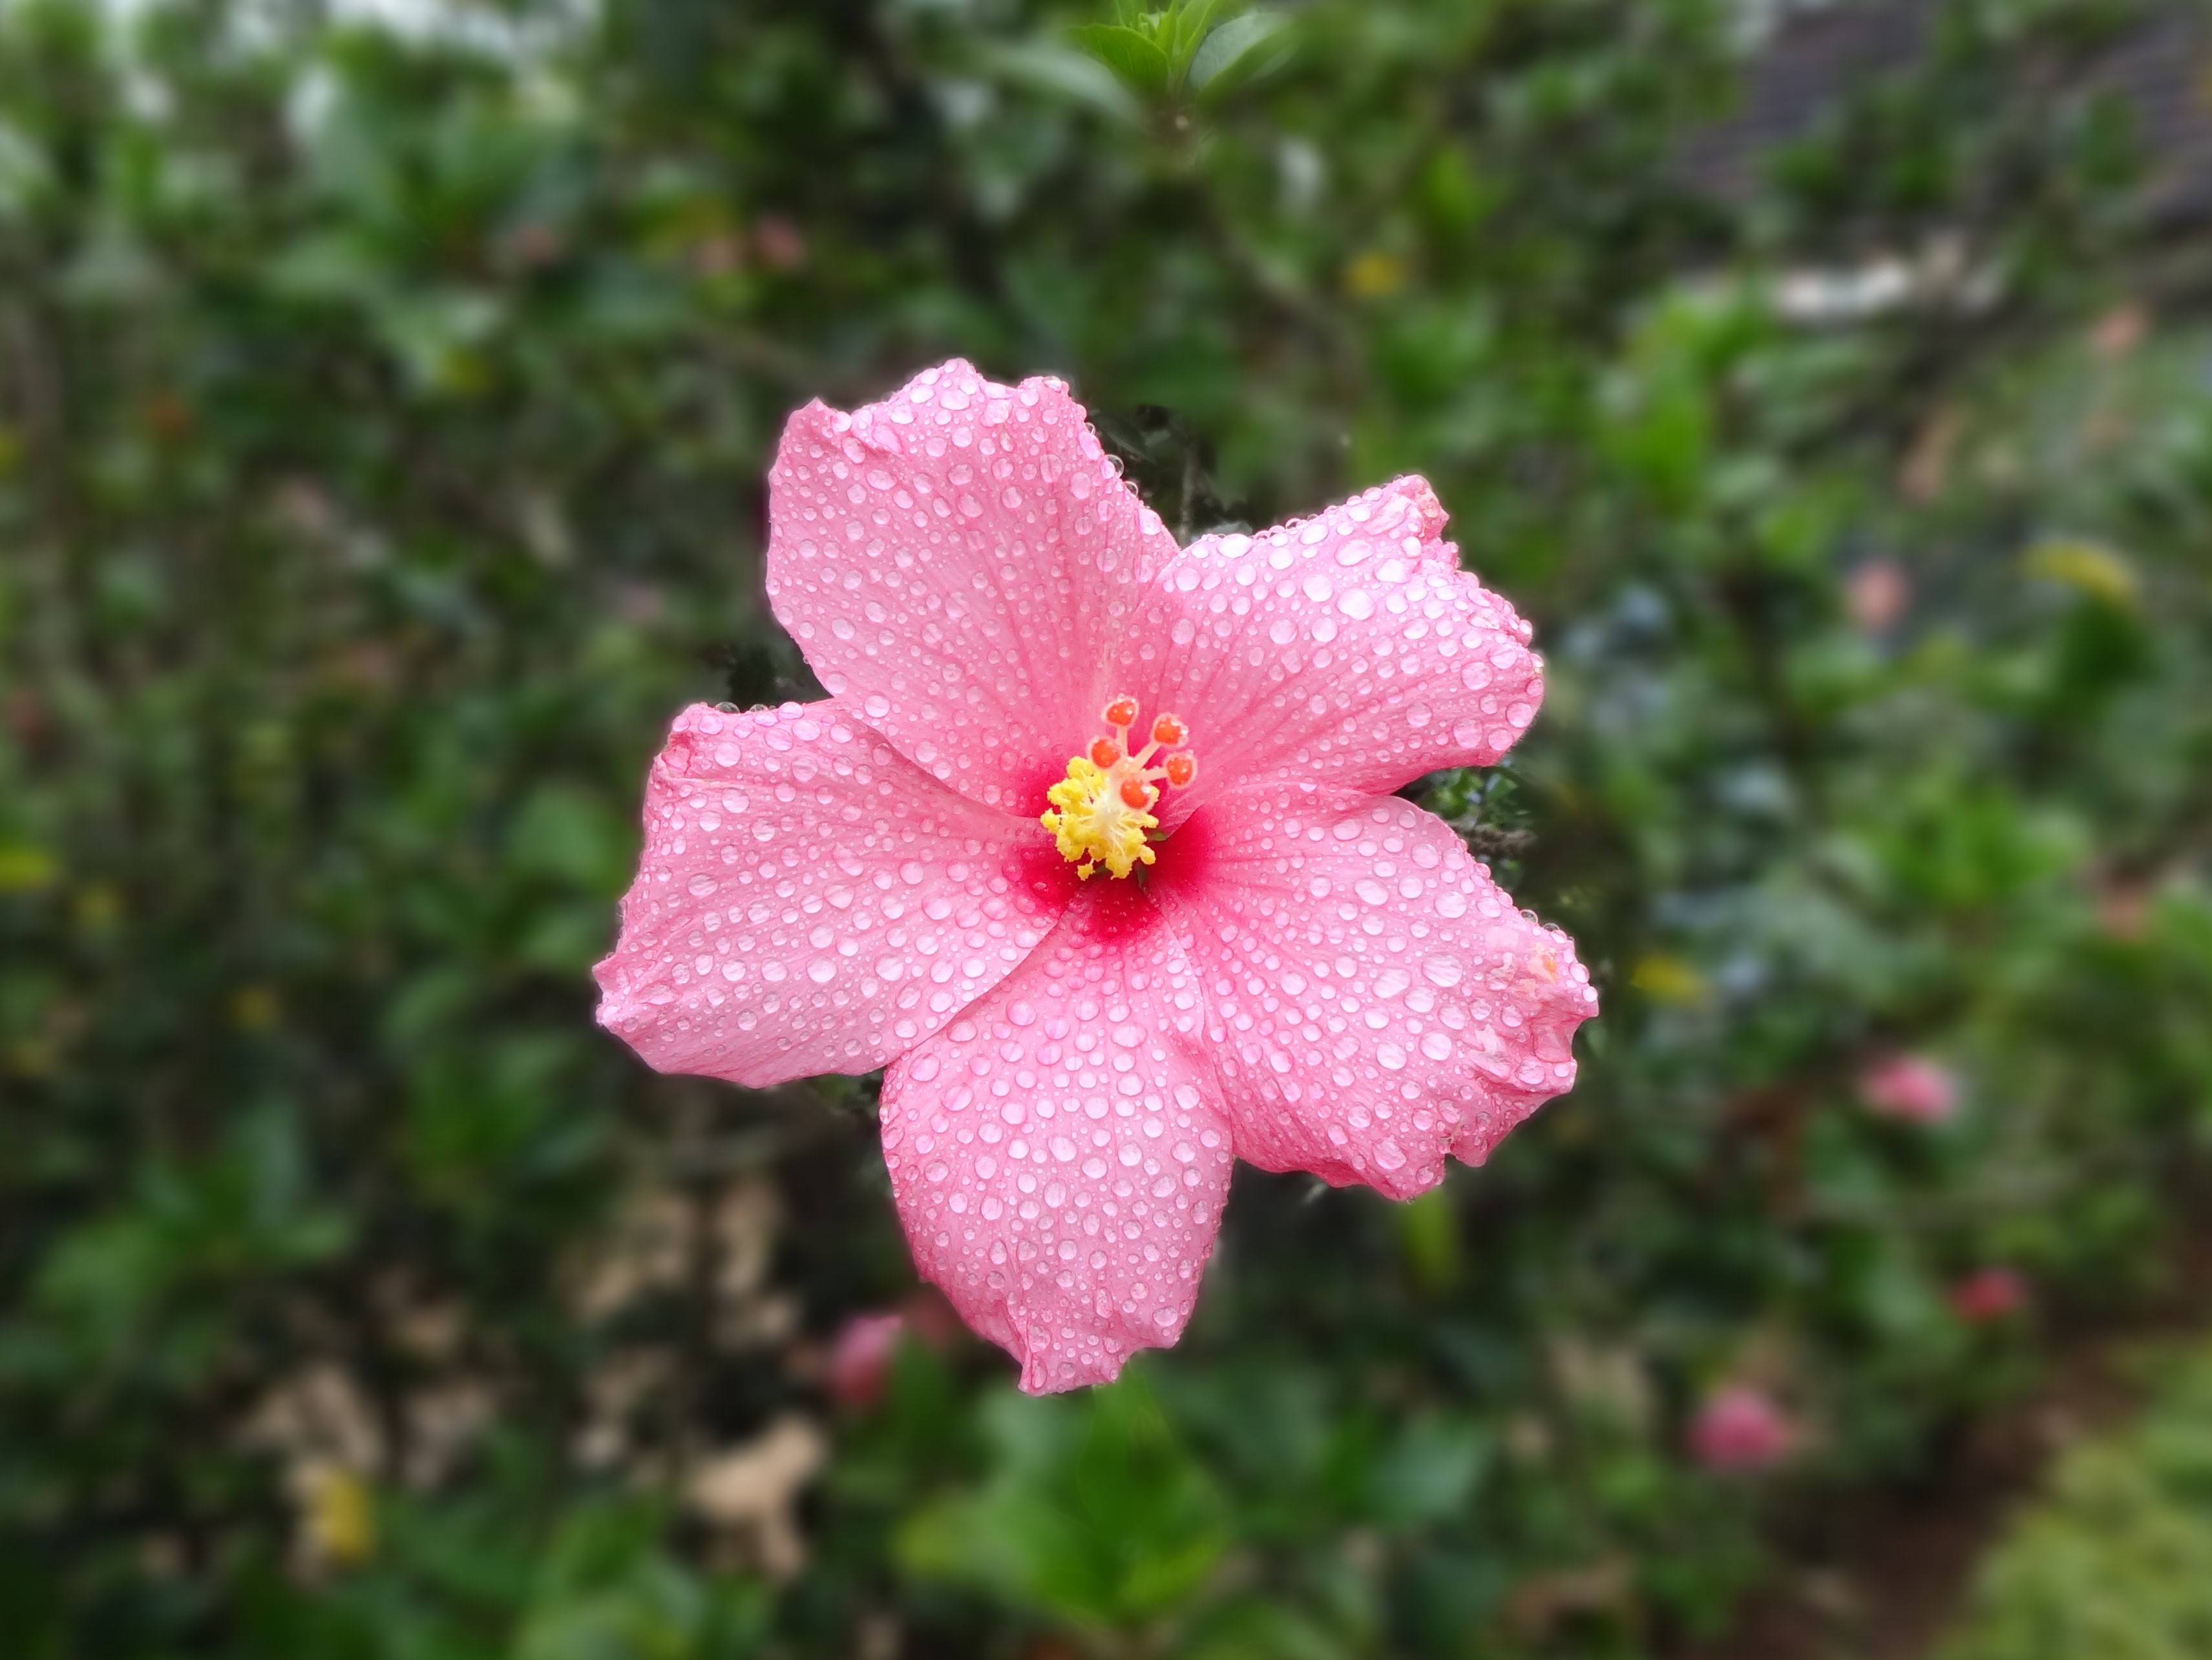 Hibiscus as seen at Chettalli, Coorg,India